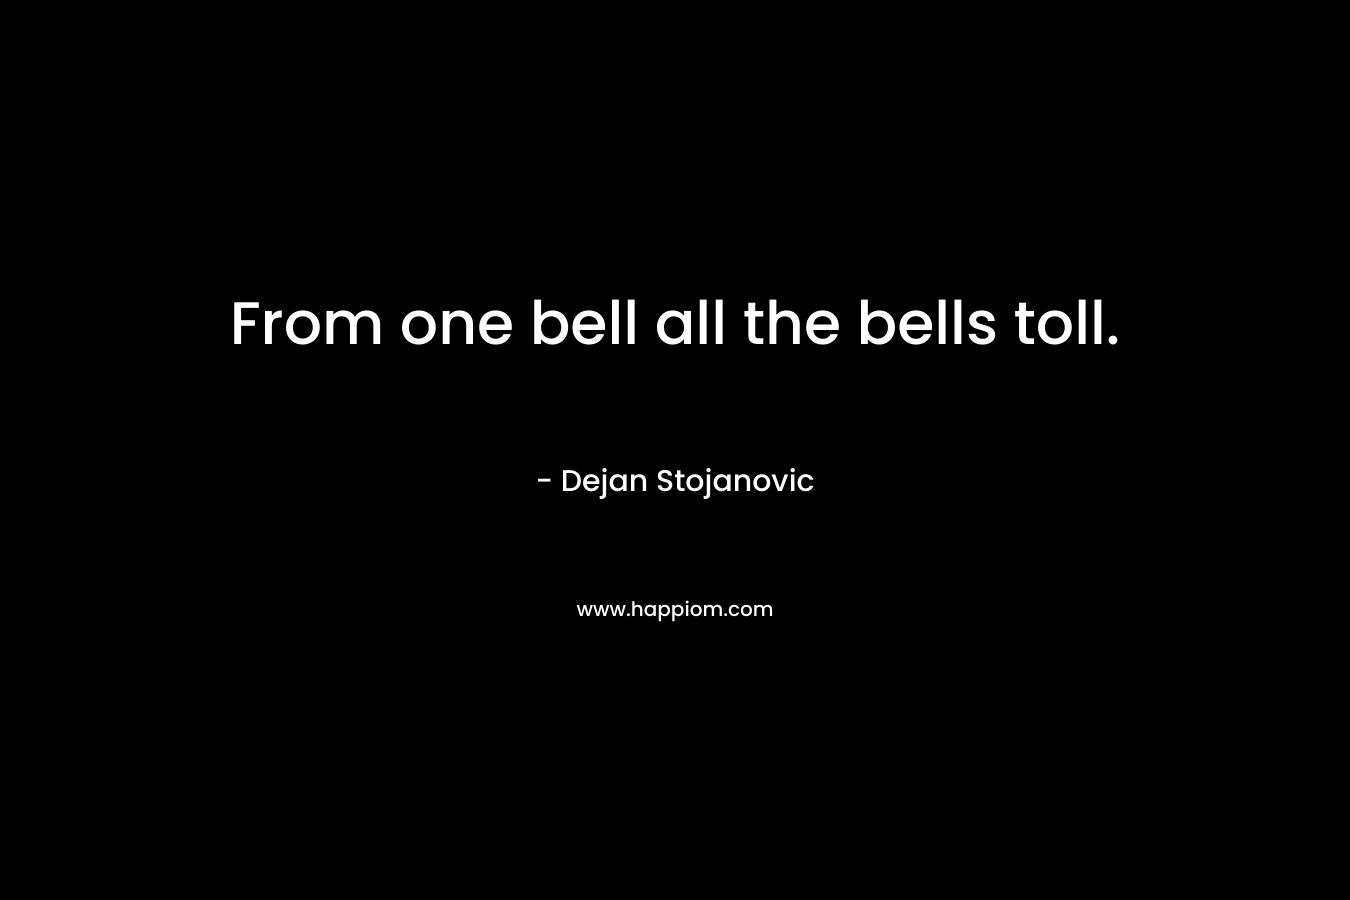 From one bell all the bells toll. – Dejan Stojanovic